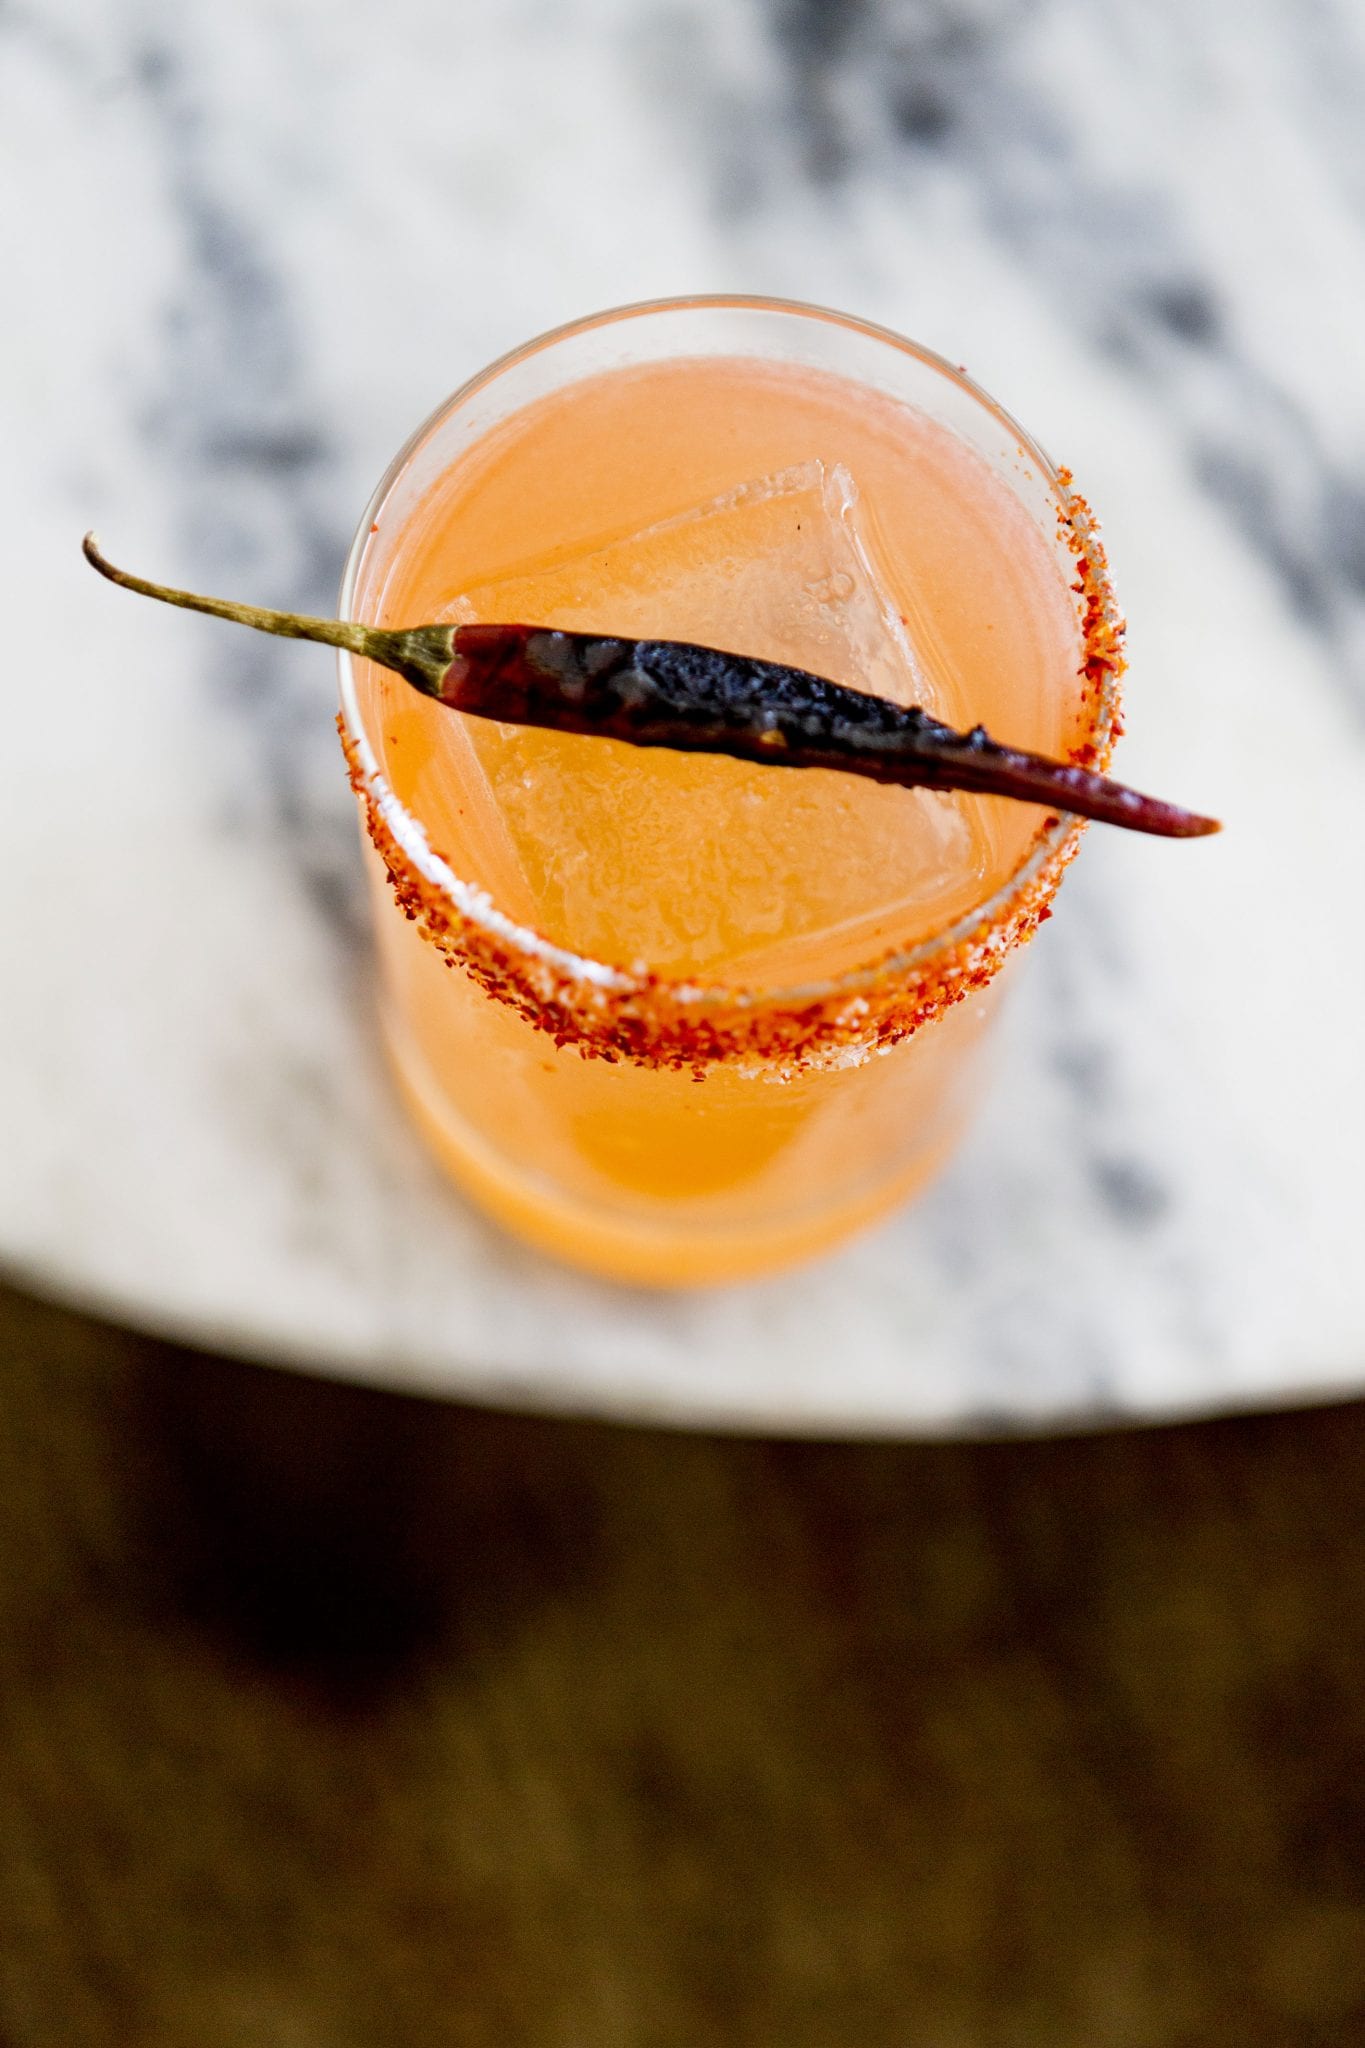 overhead view of cocktail with chilli on rim and grilled chilli pepper resting on rim of glass